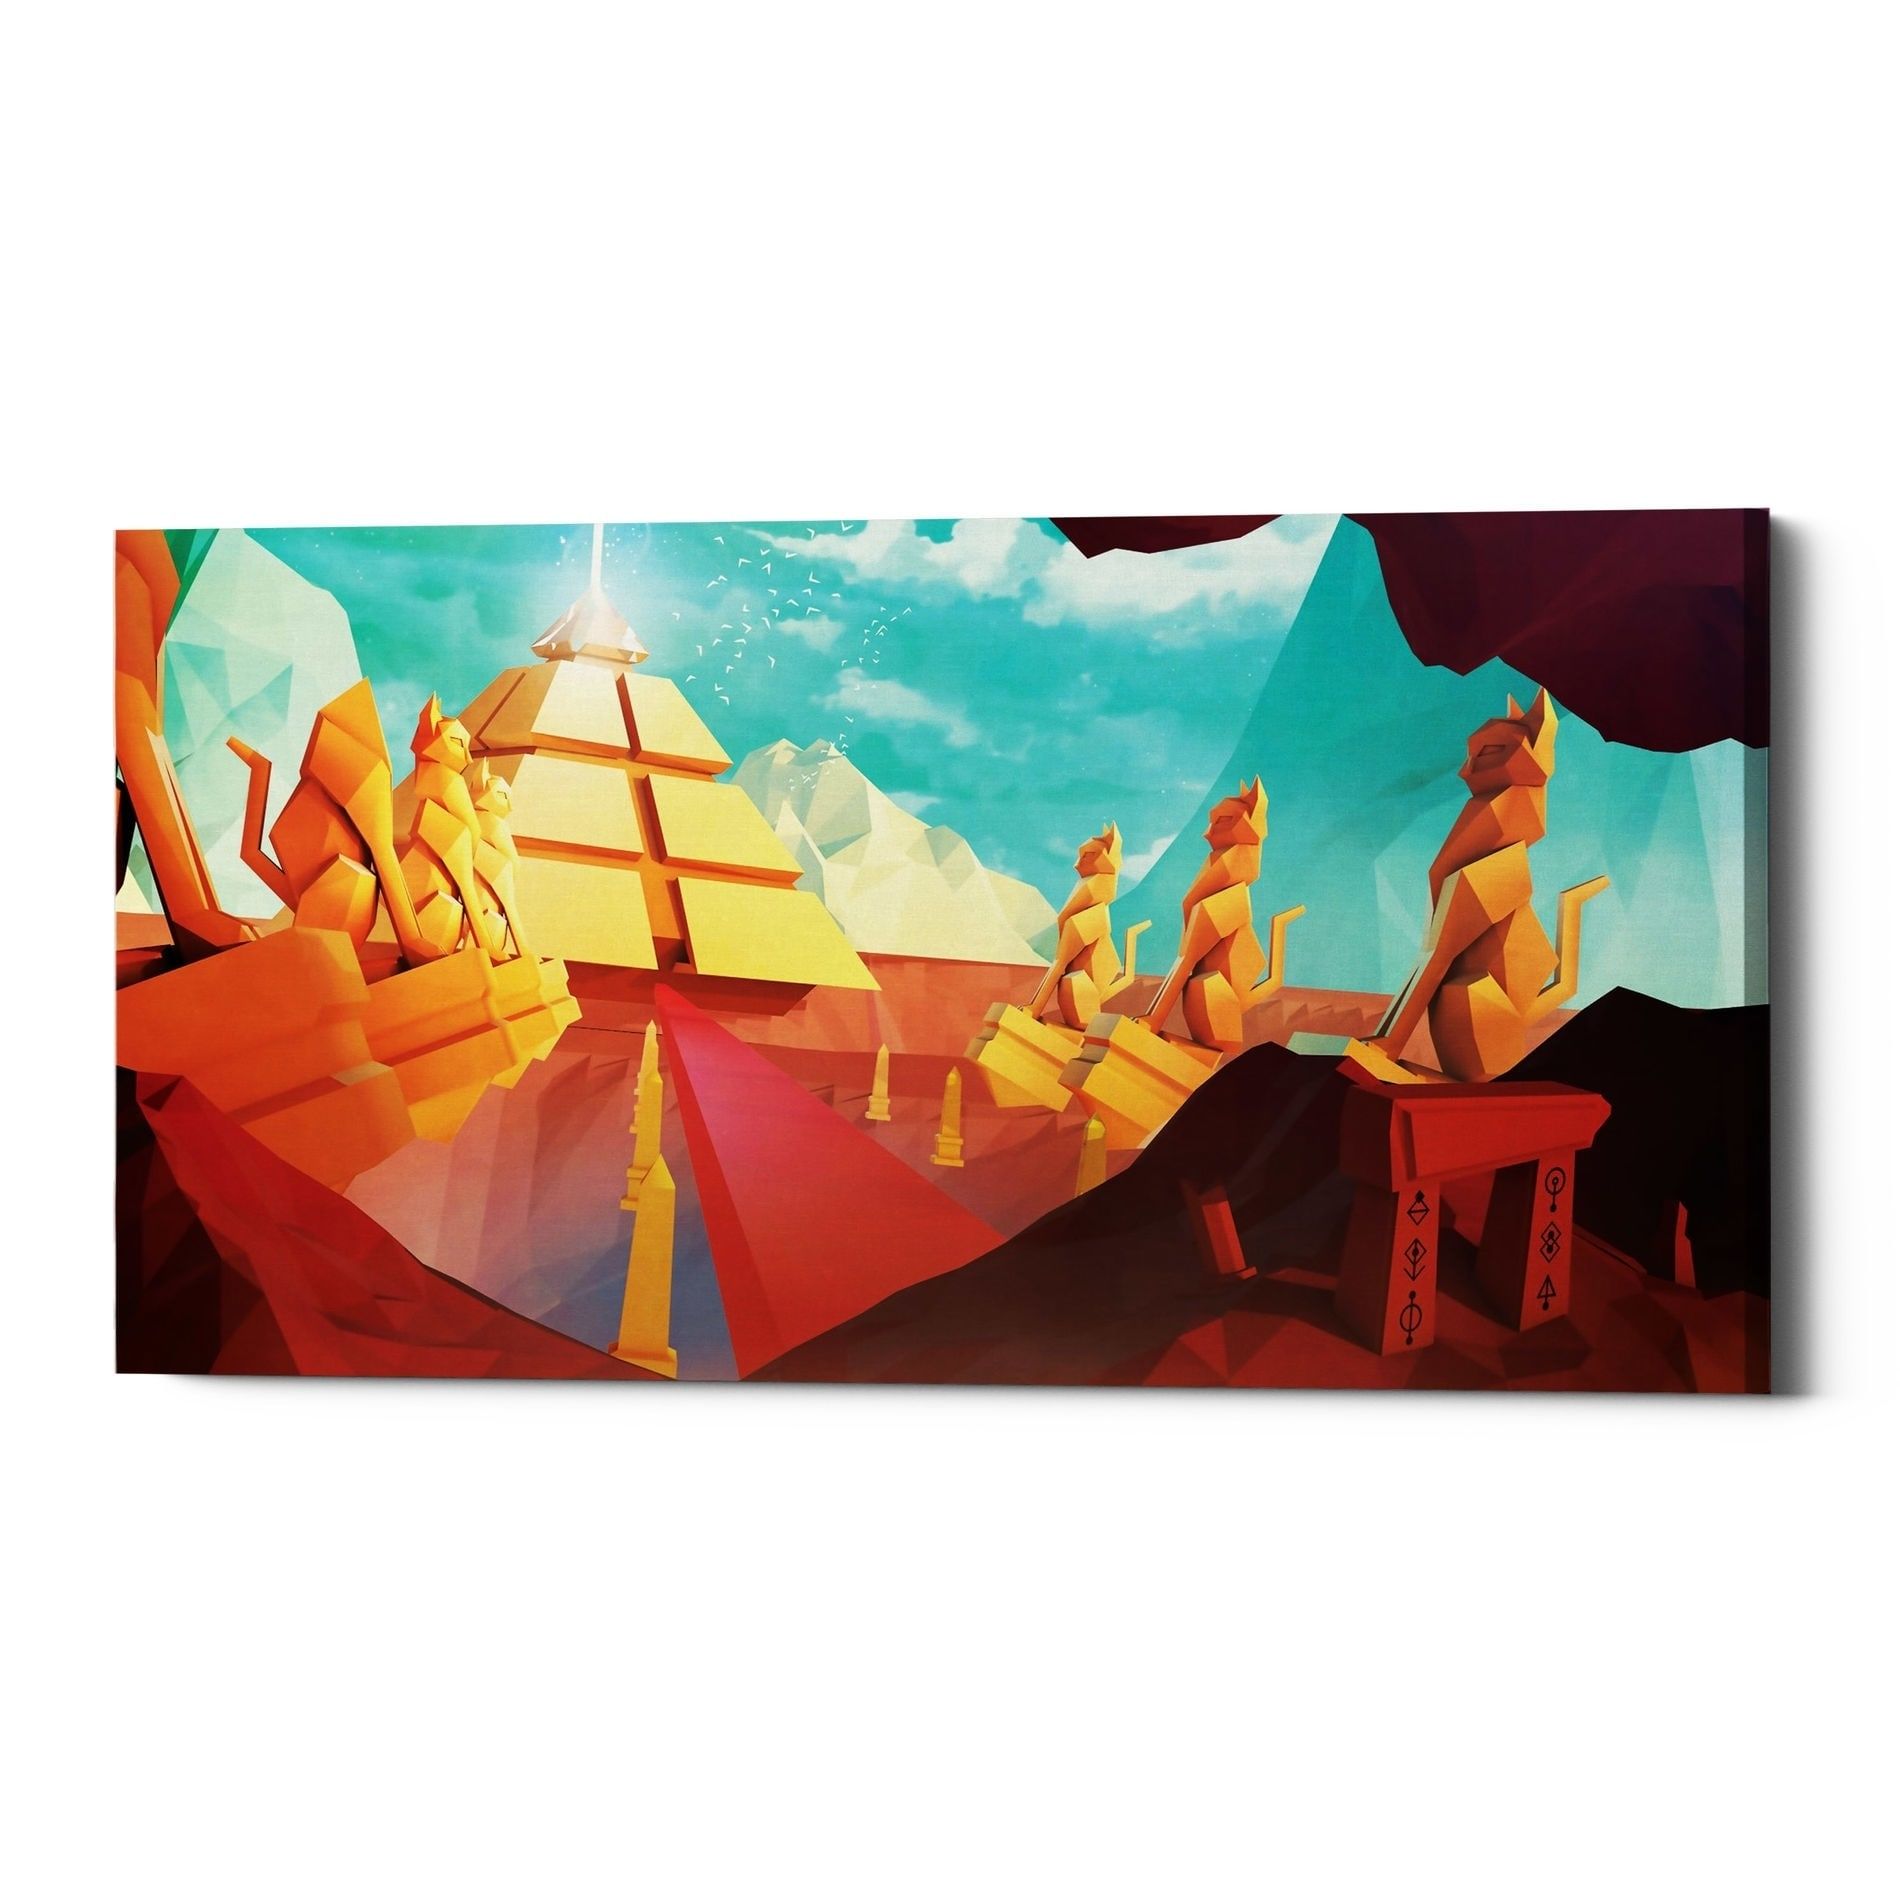 Epic Graffiti "low Poly Pyramid"jonathan Lam, Giclee With Regard To Most Recently Released Pyrimids Wall Art (View 7 of 20)